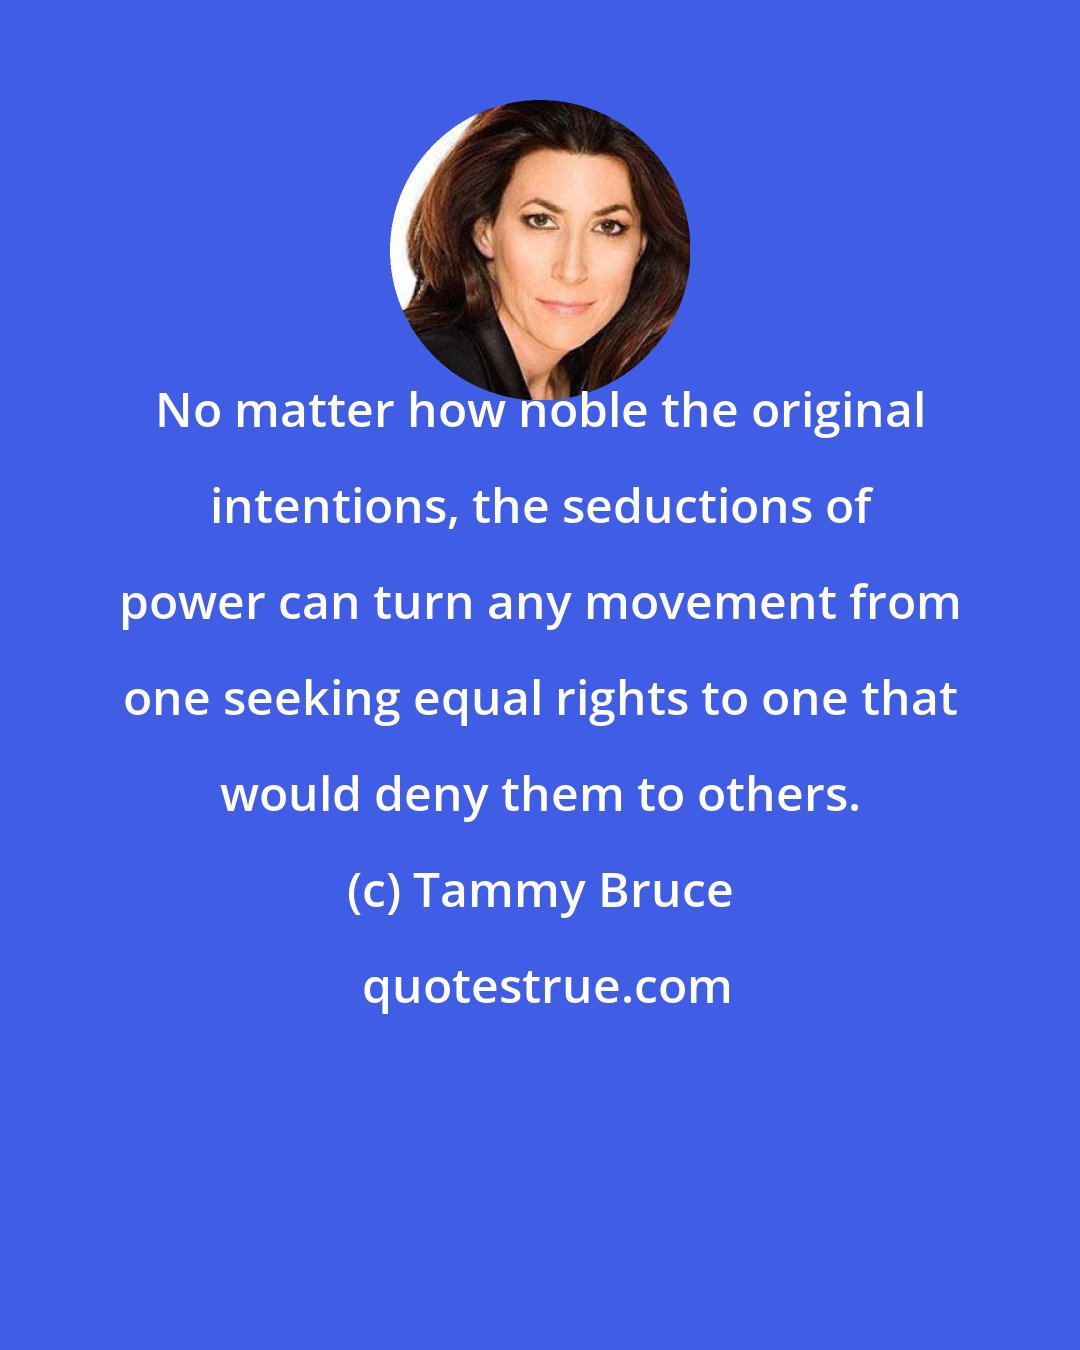 Tammy Bruce: No matter how noble the original intentions, the seductions of power can turn any movement from one seeking equal rights to one that would deny them to others.